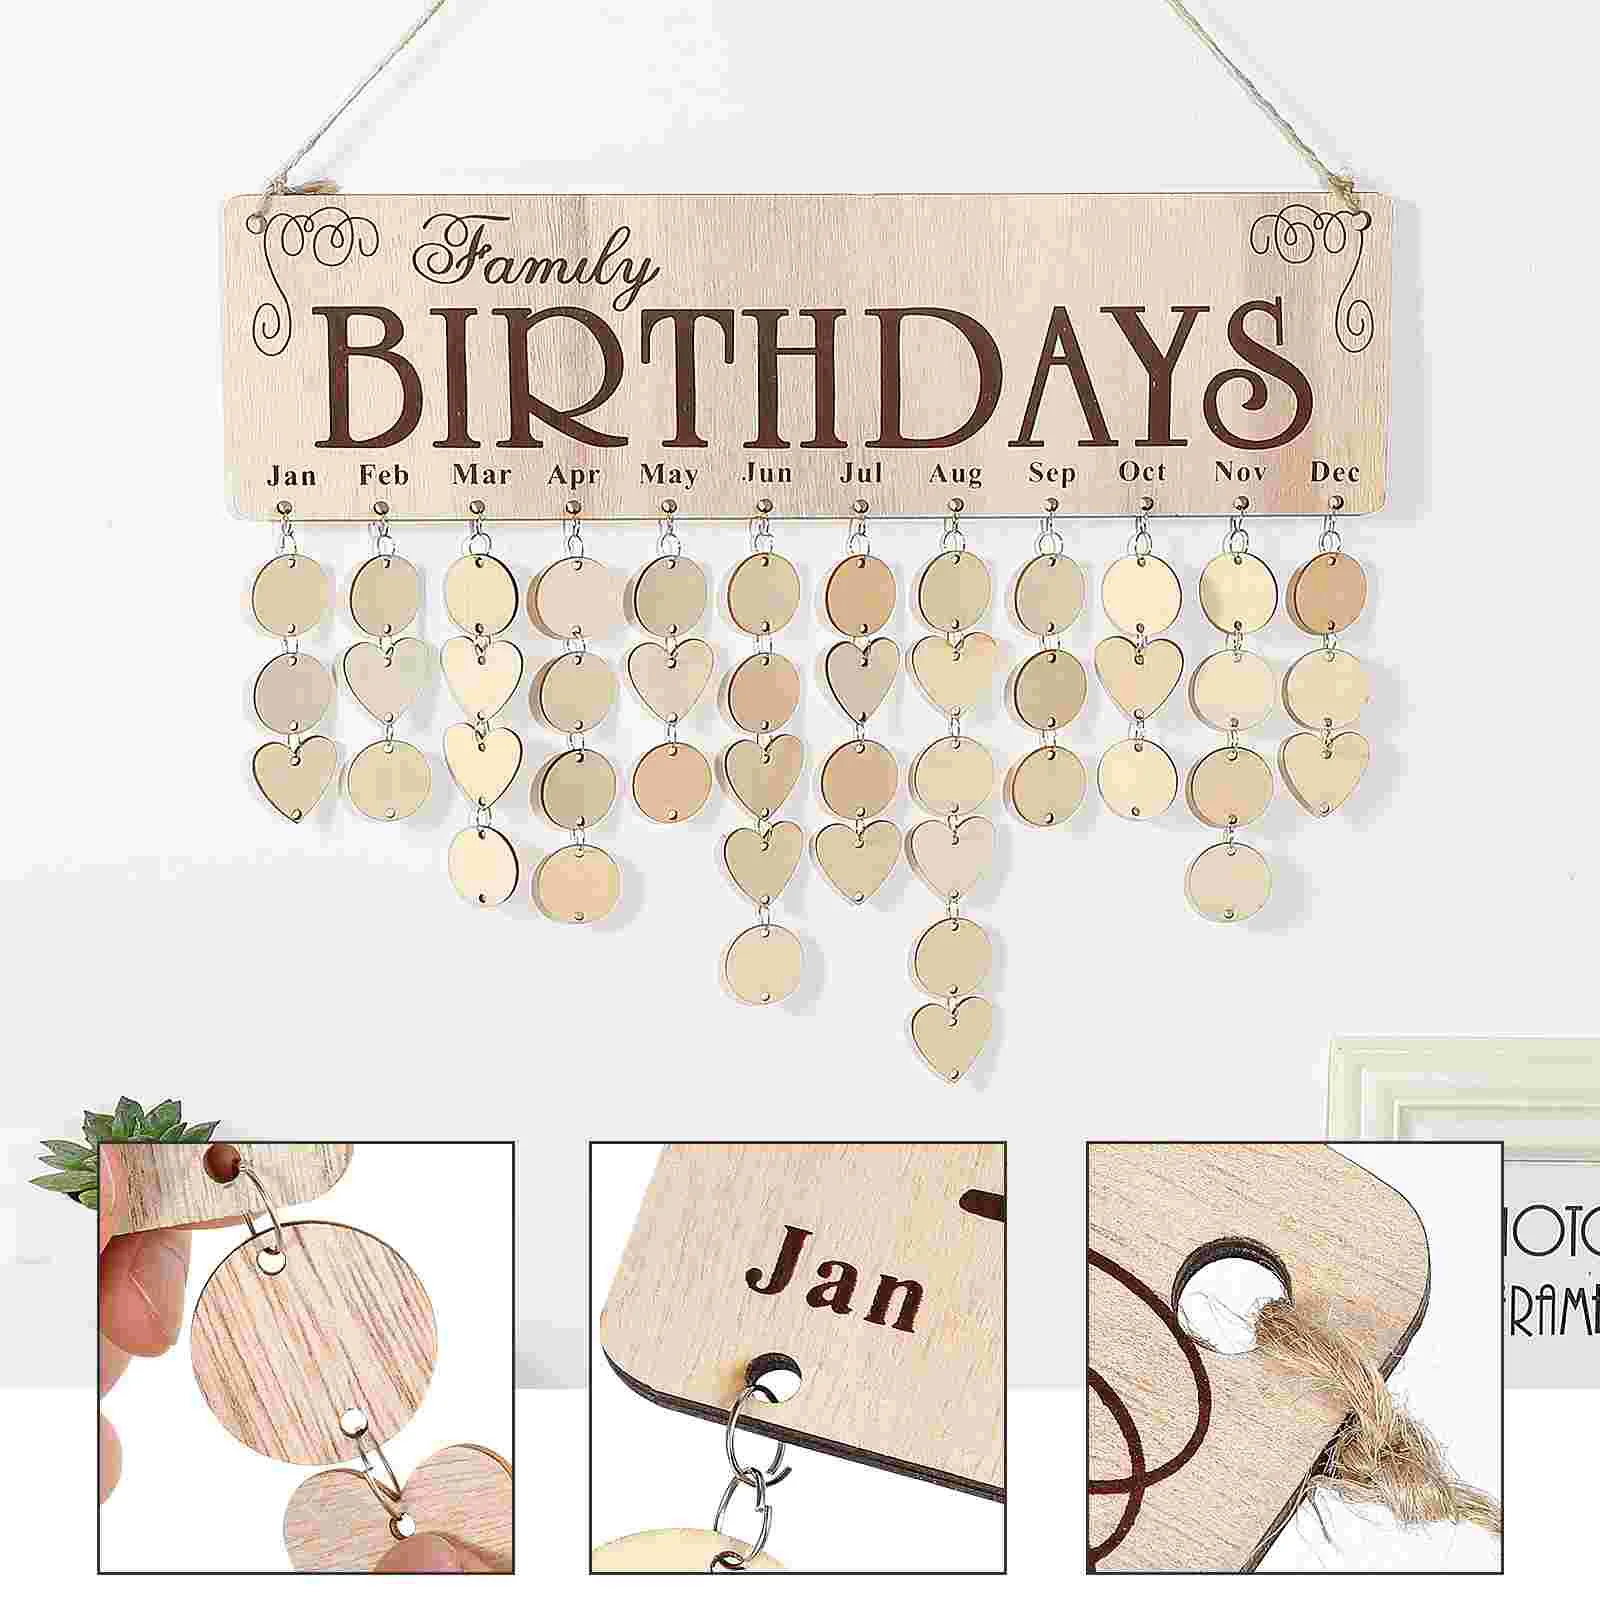 Calendar Birthday Wooden Family Board Hanging Wall Reminder Decor Tagsdiy Block home Advent Bulletin Plaque Board For Christmas